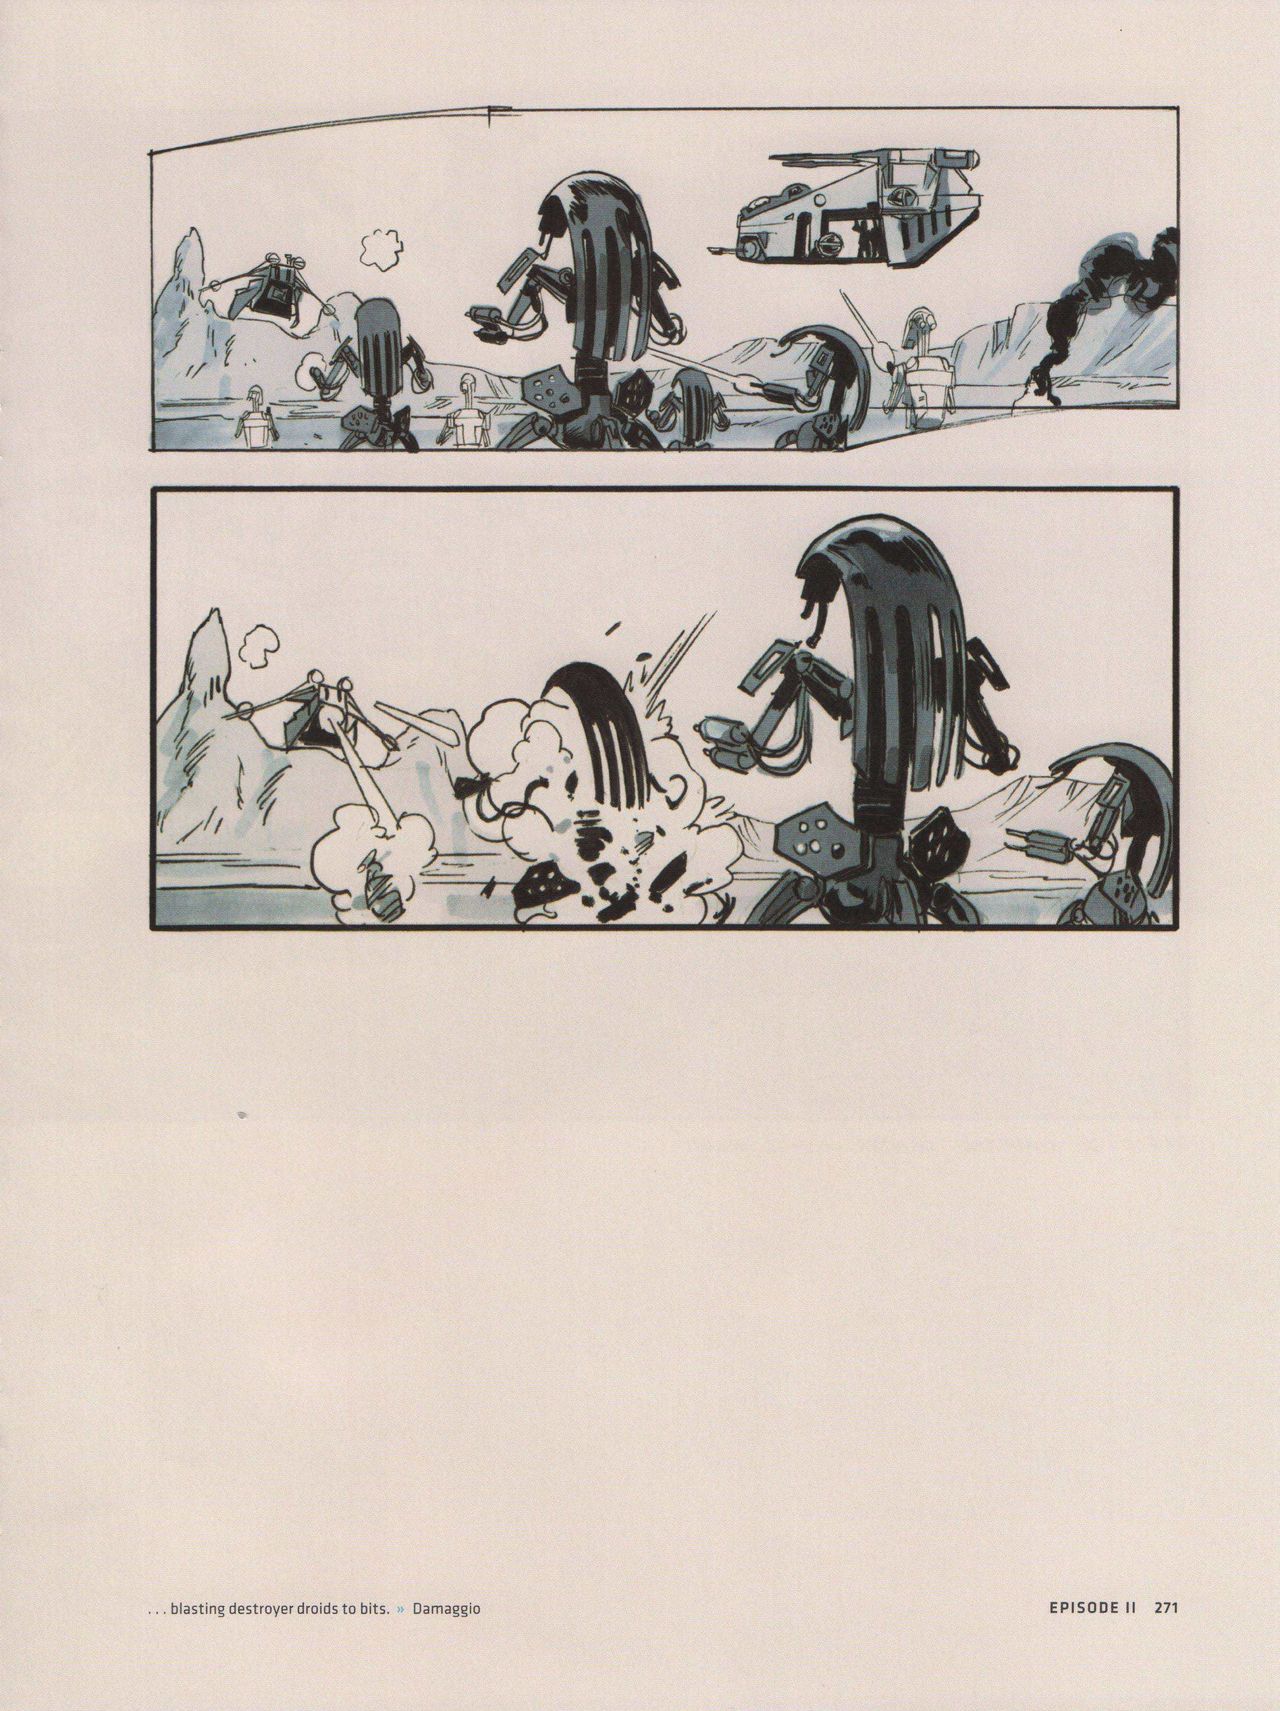 Star Wars Storyboards - The Prequel Trilogy 275